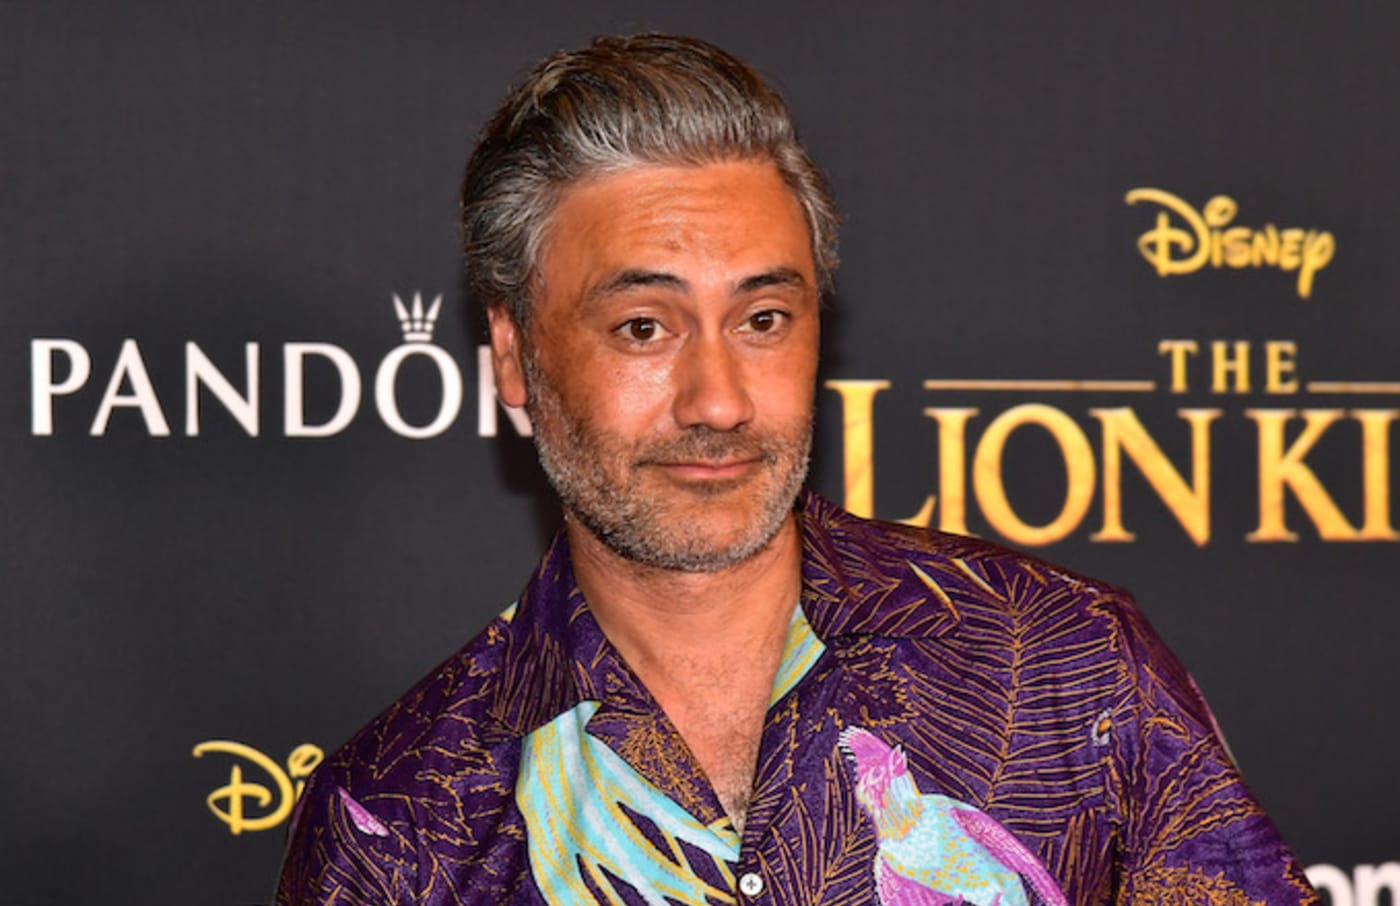 Taika Waititi attends the premiere of Disney's "The Lion King."